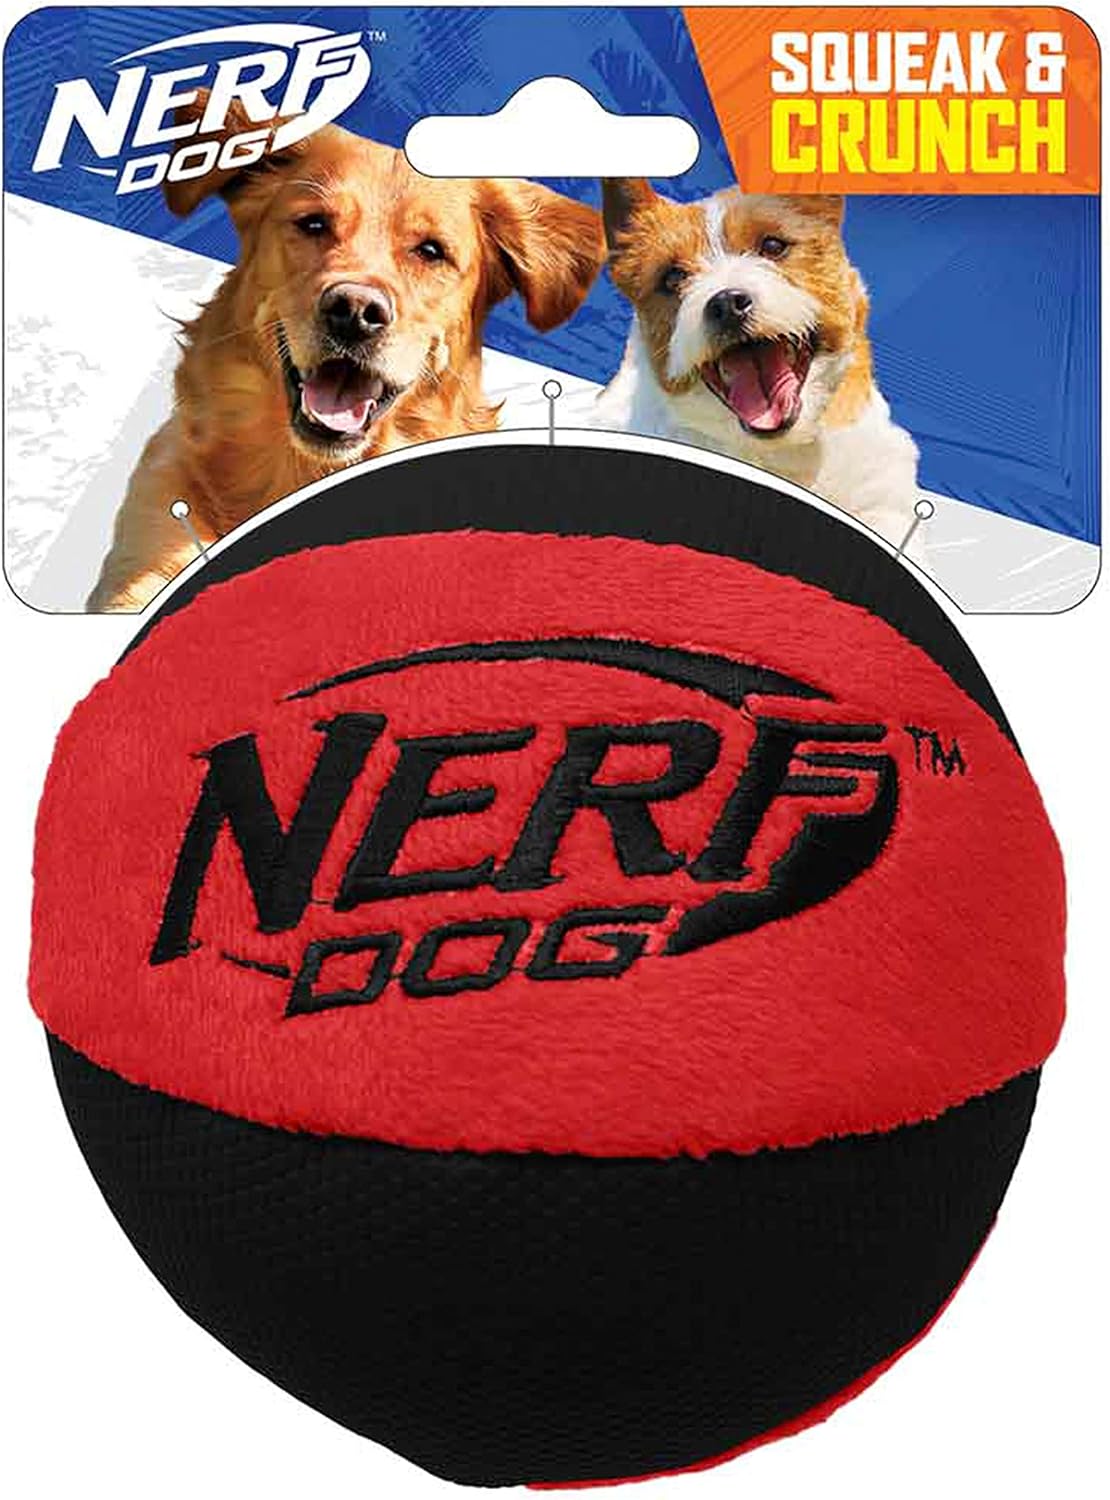 Our Yorkie is a baller and prefers the bigger balls but usually they are too heavy! Not this one! And it has the strength of Nerf so it/they last! Fetch never was better! 